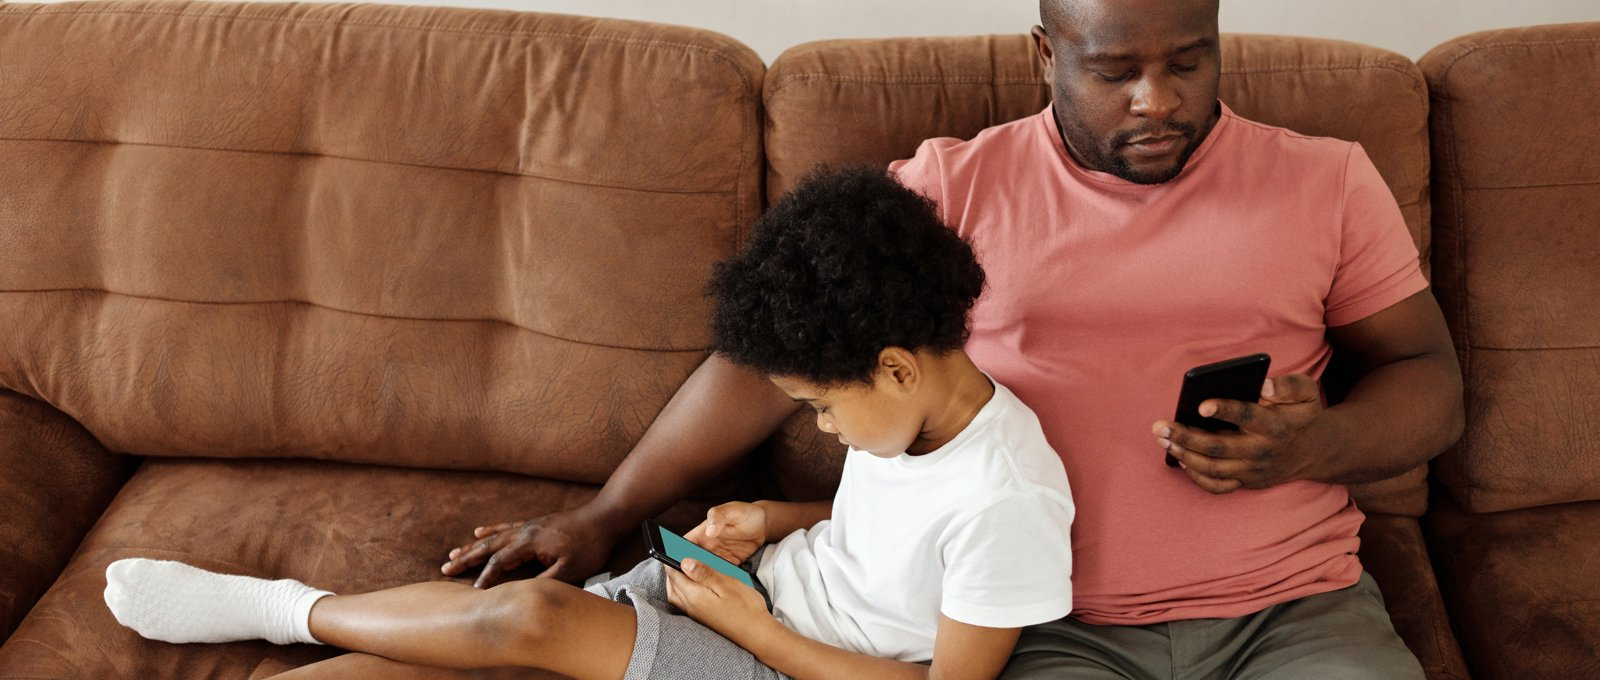 A child leaning against his father, both using mobile phones. They are sitting on a brown leather sofa.